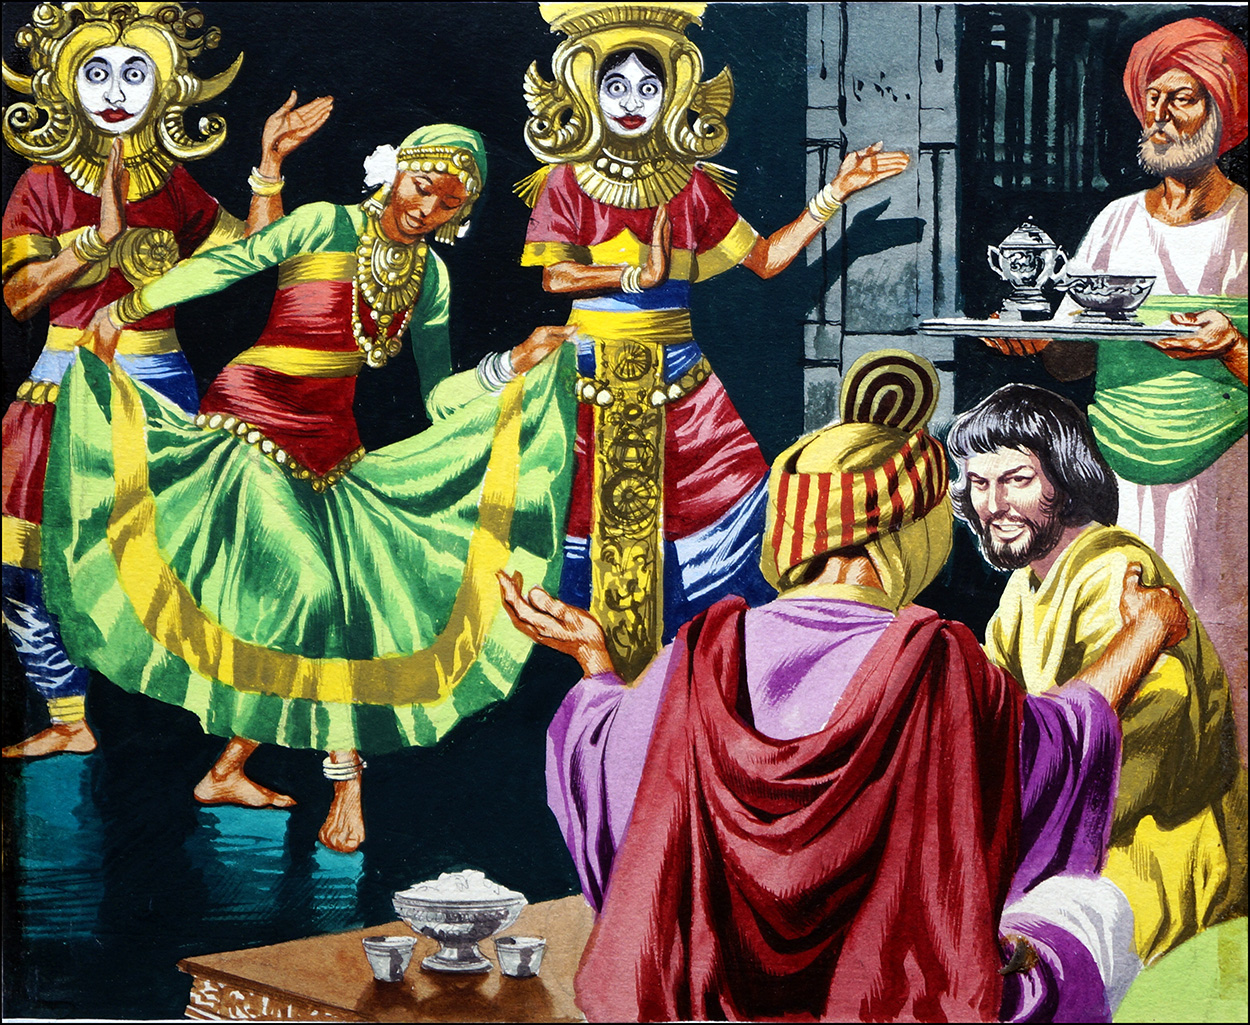 Marco Polo and the Dancing Girls (Original) art by Ron Embleton Art at The Illustration Art Gallery